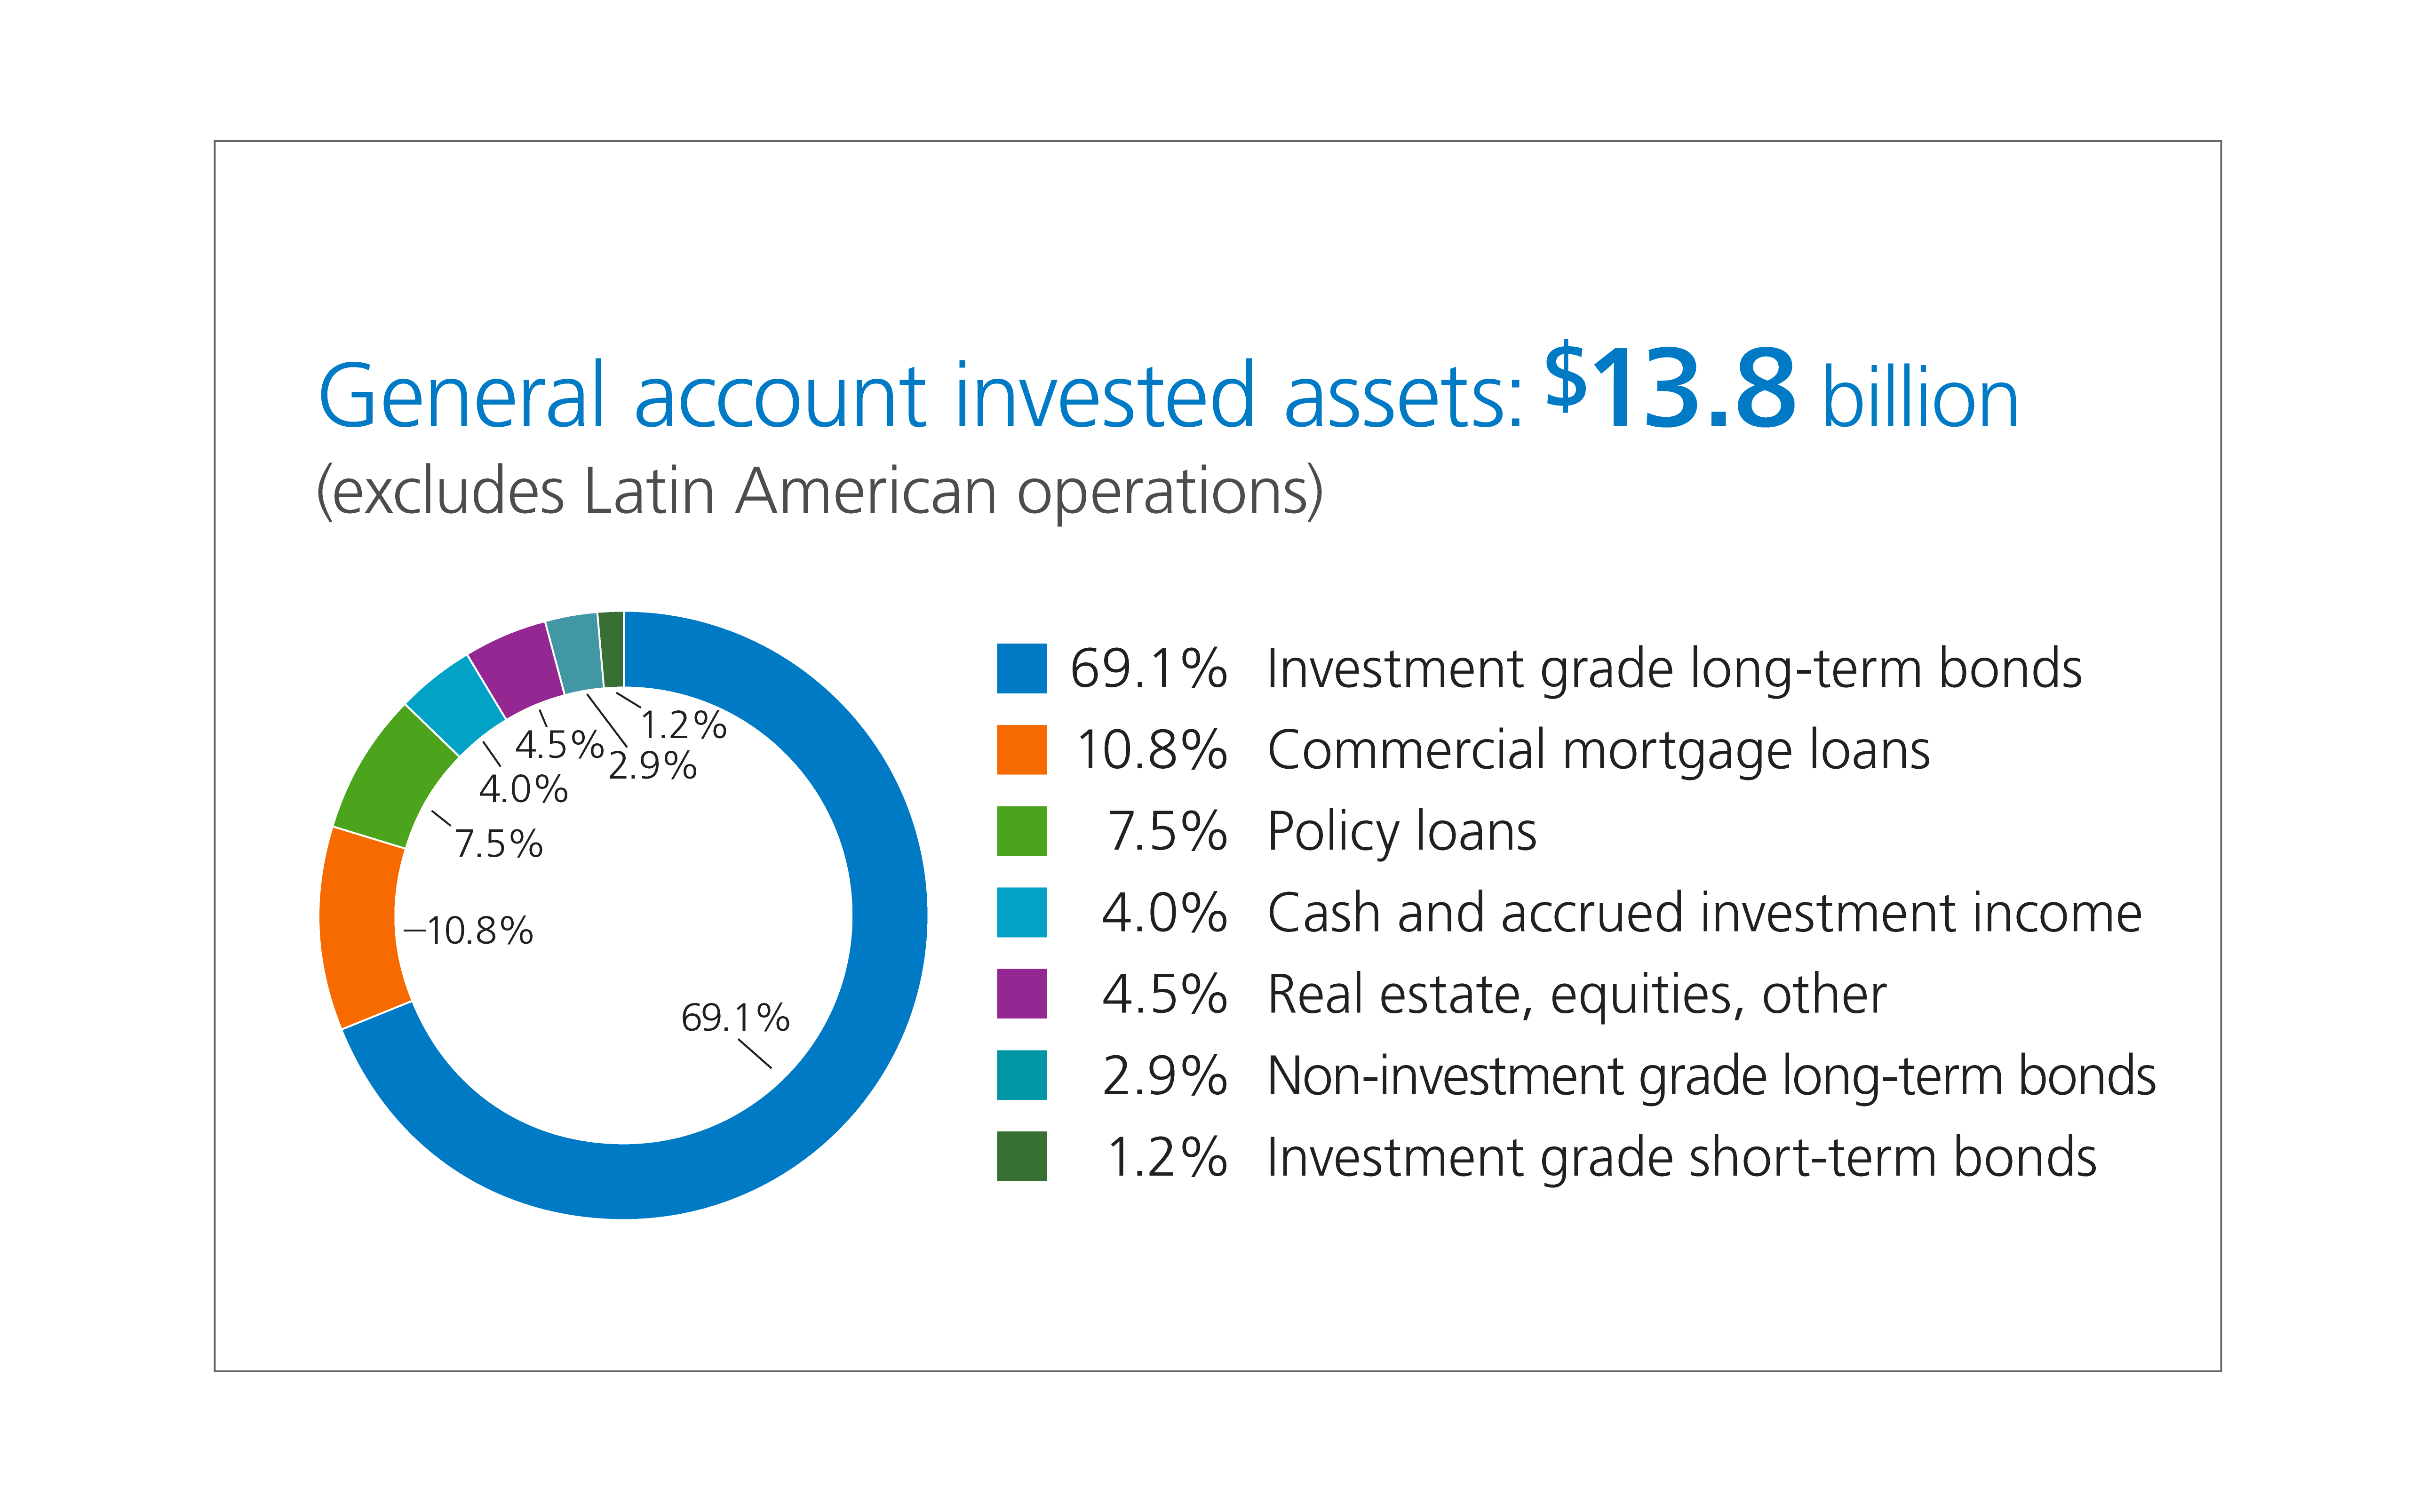 Circle chart showing General Account Assets invested is 12.1 billion.